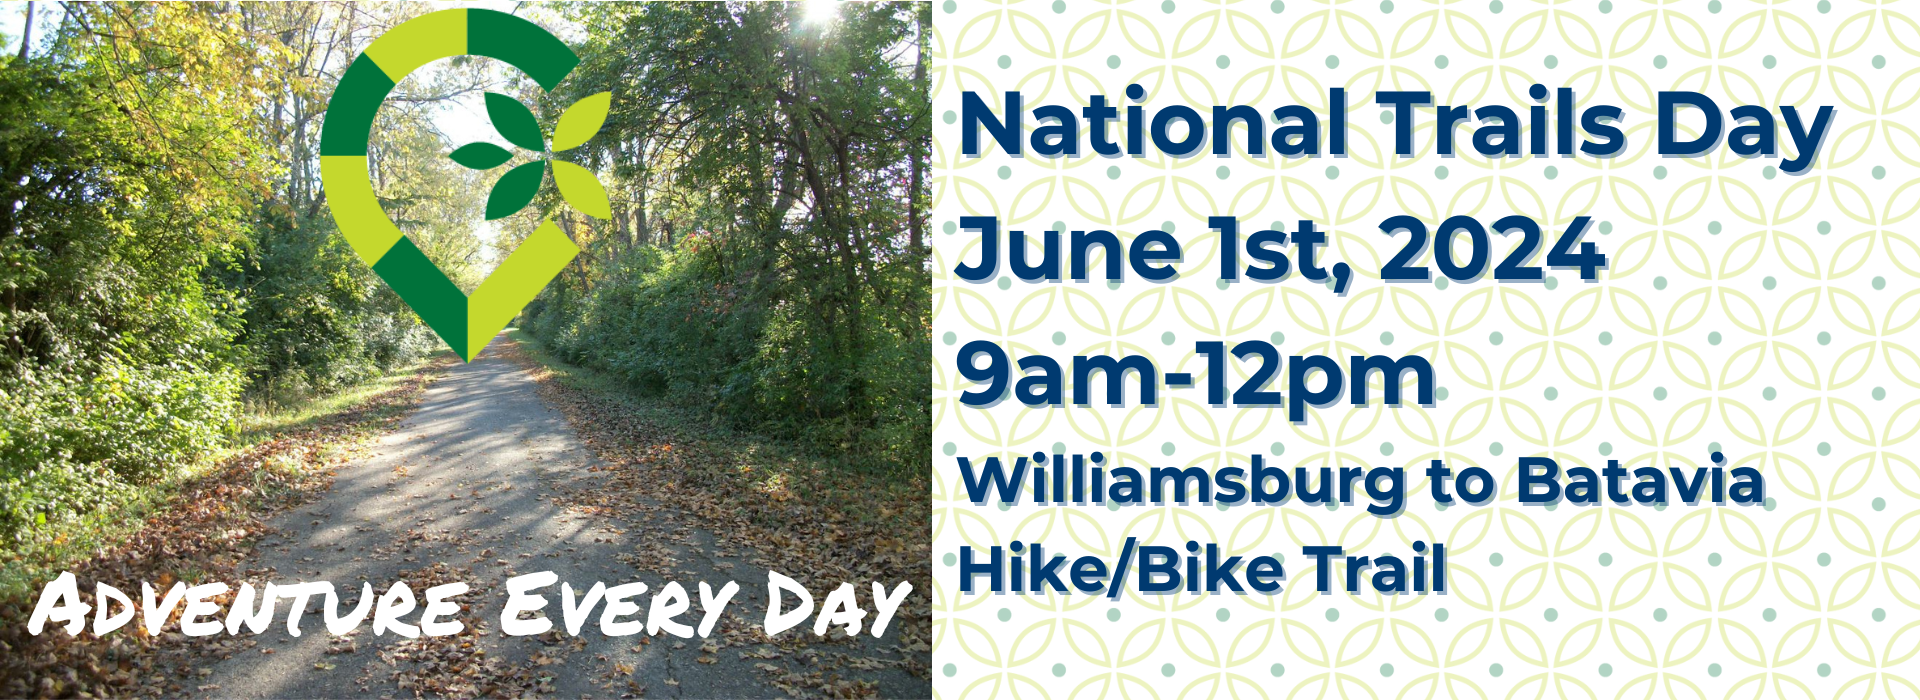 National Trails Day is Saturday June 1st